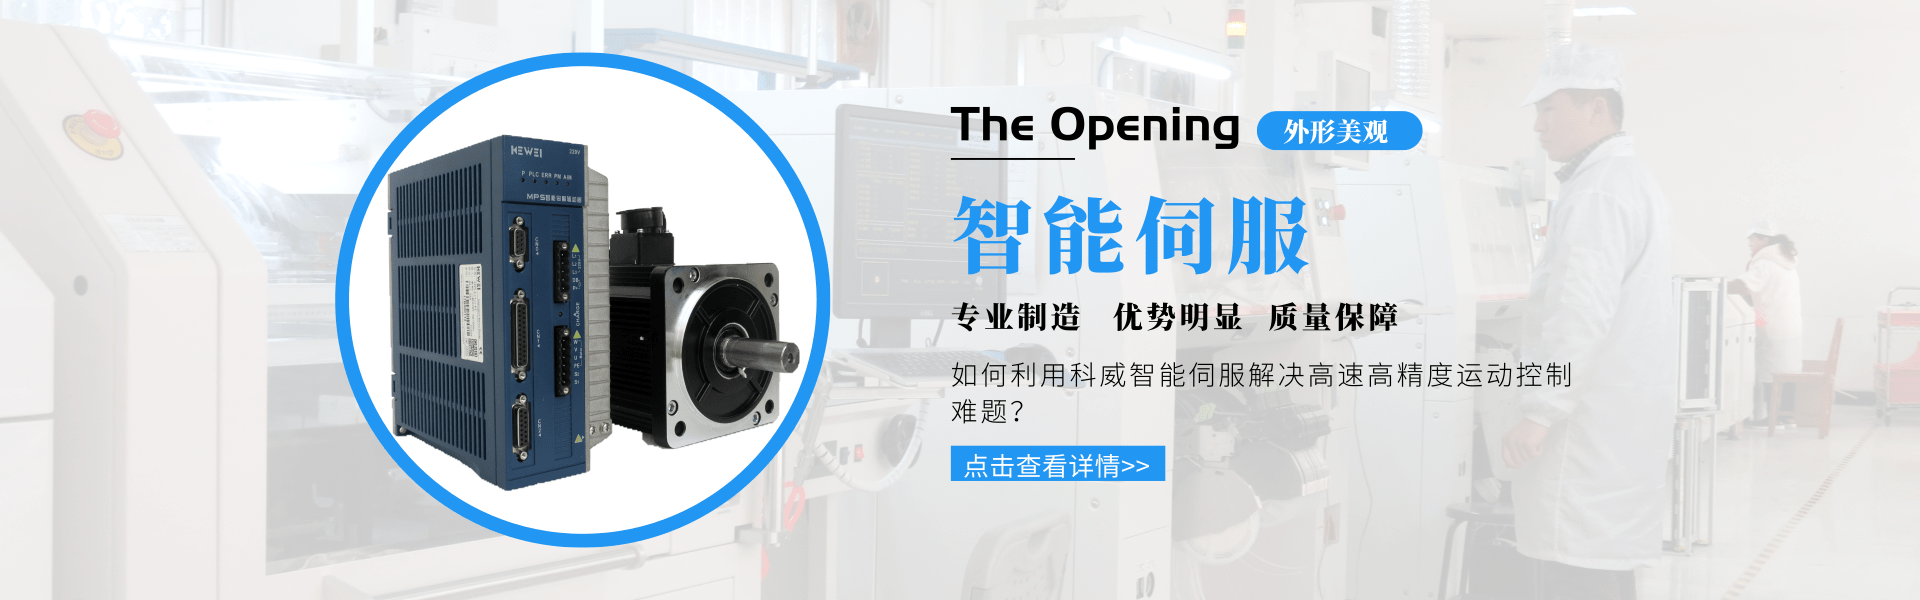 MPS-I-1521-PT（1.5KW）-开云网页版